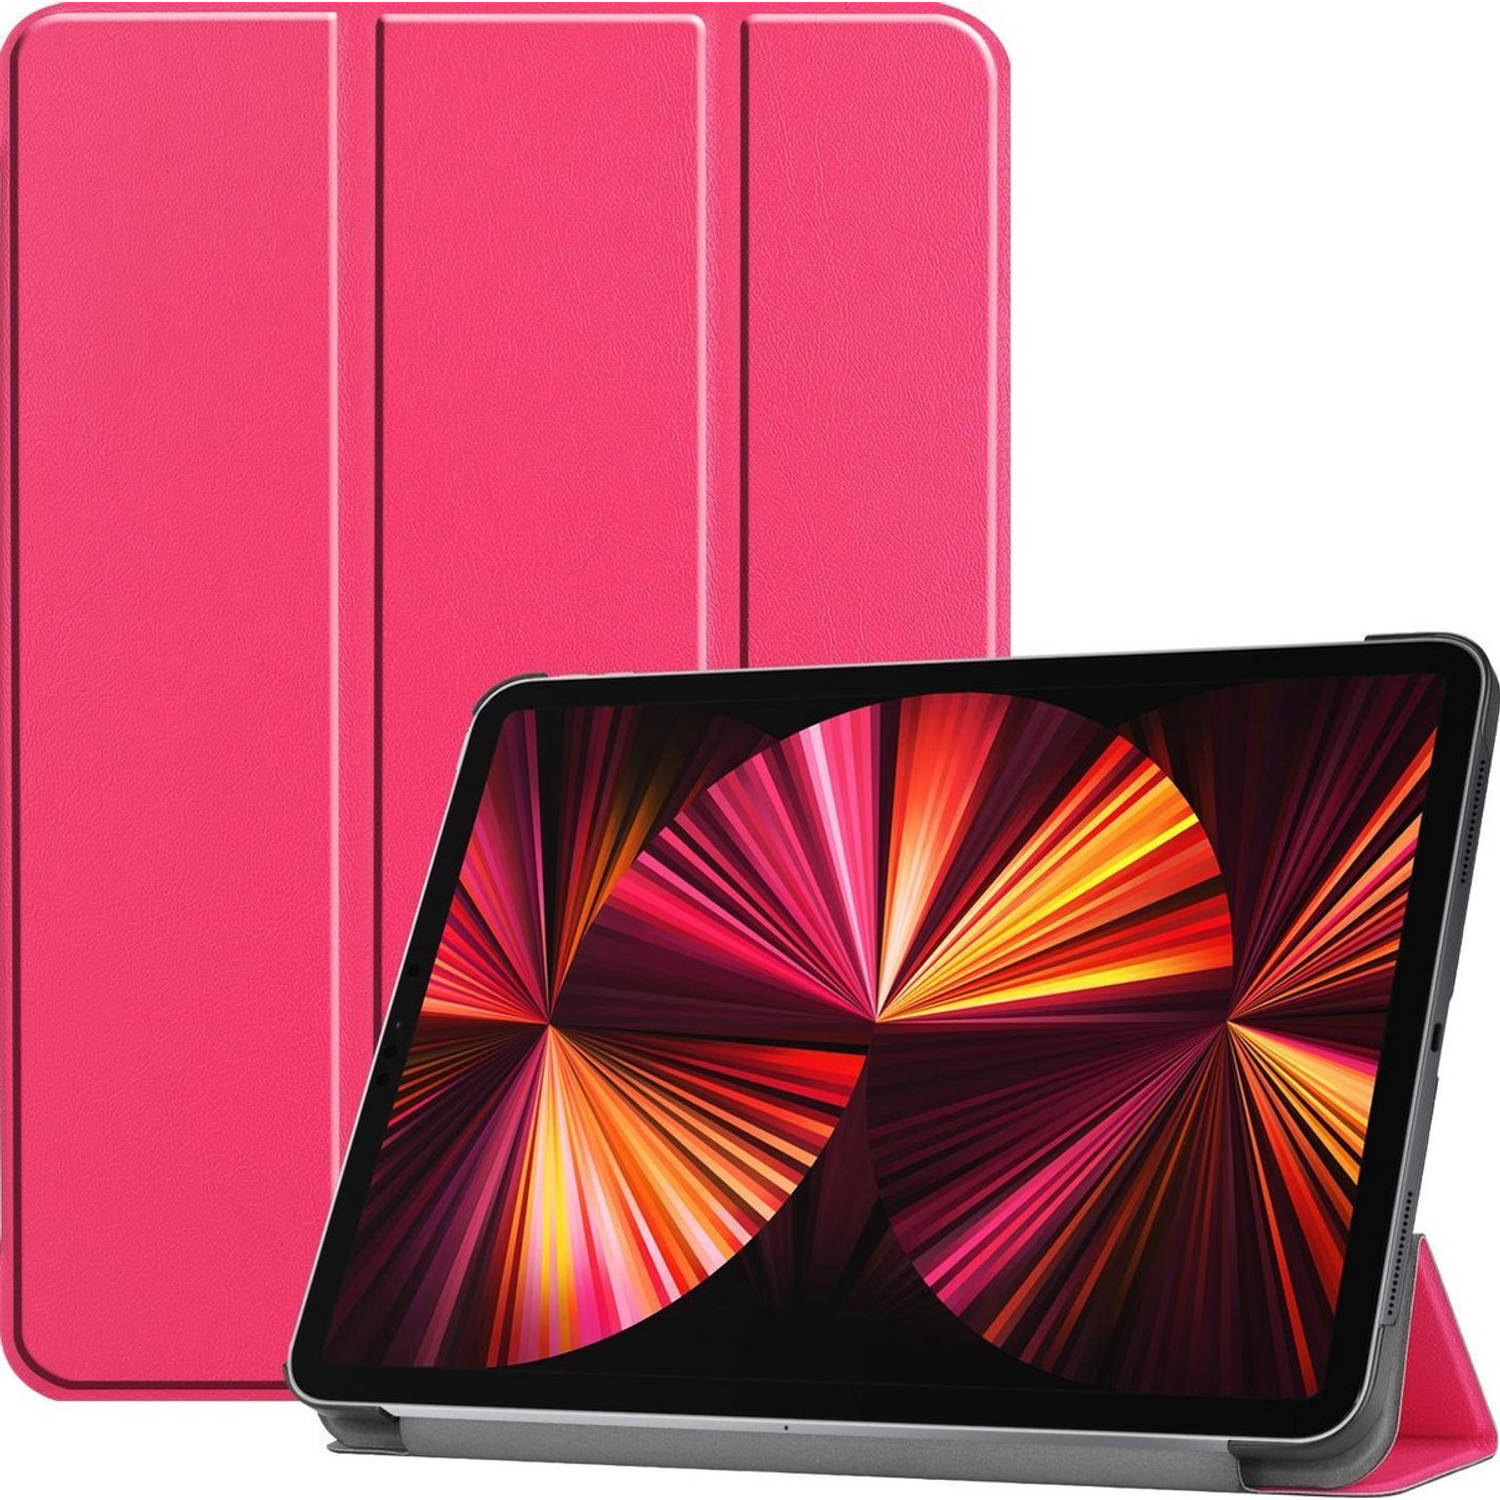 Basey Ipad Pro 2021 11 Inch Hoes Case Hoesje Donker Roze Hardcover Book Case Cover